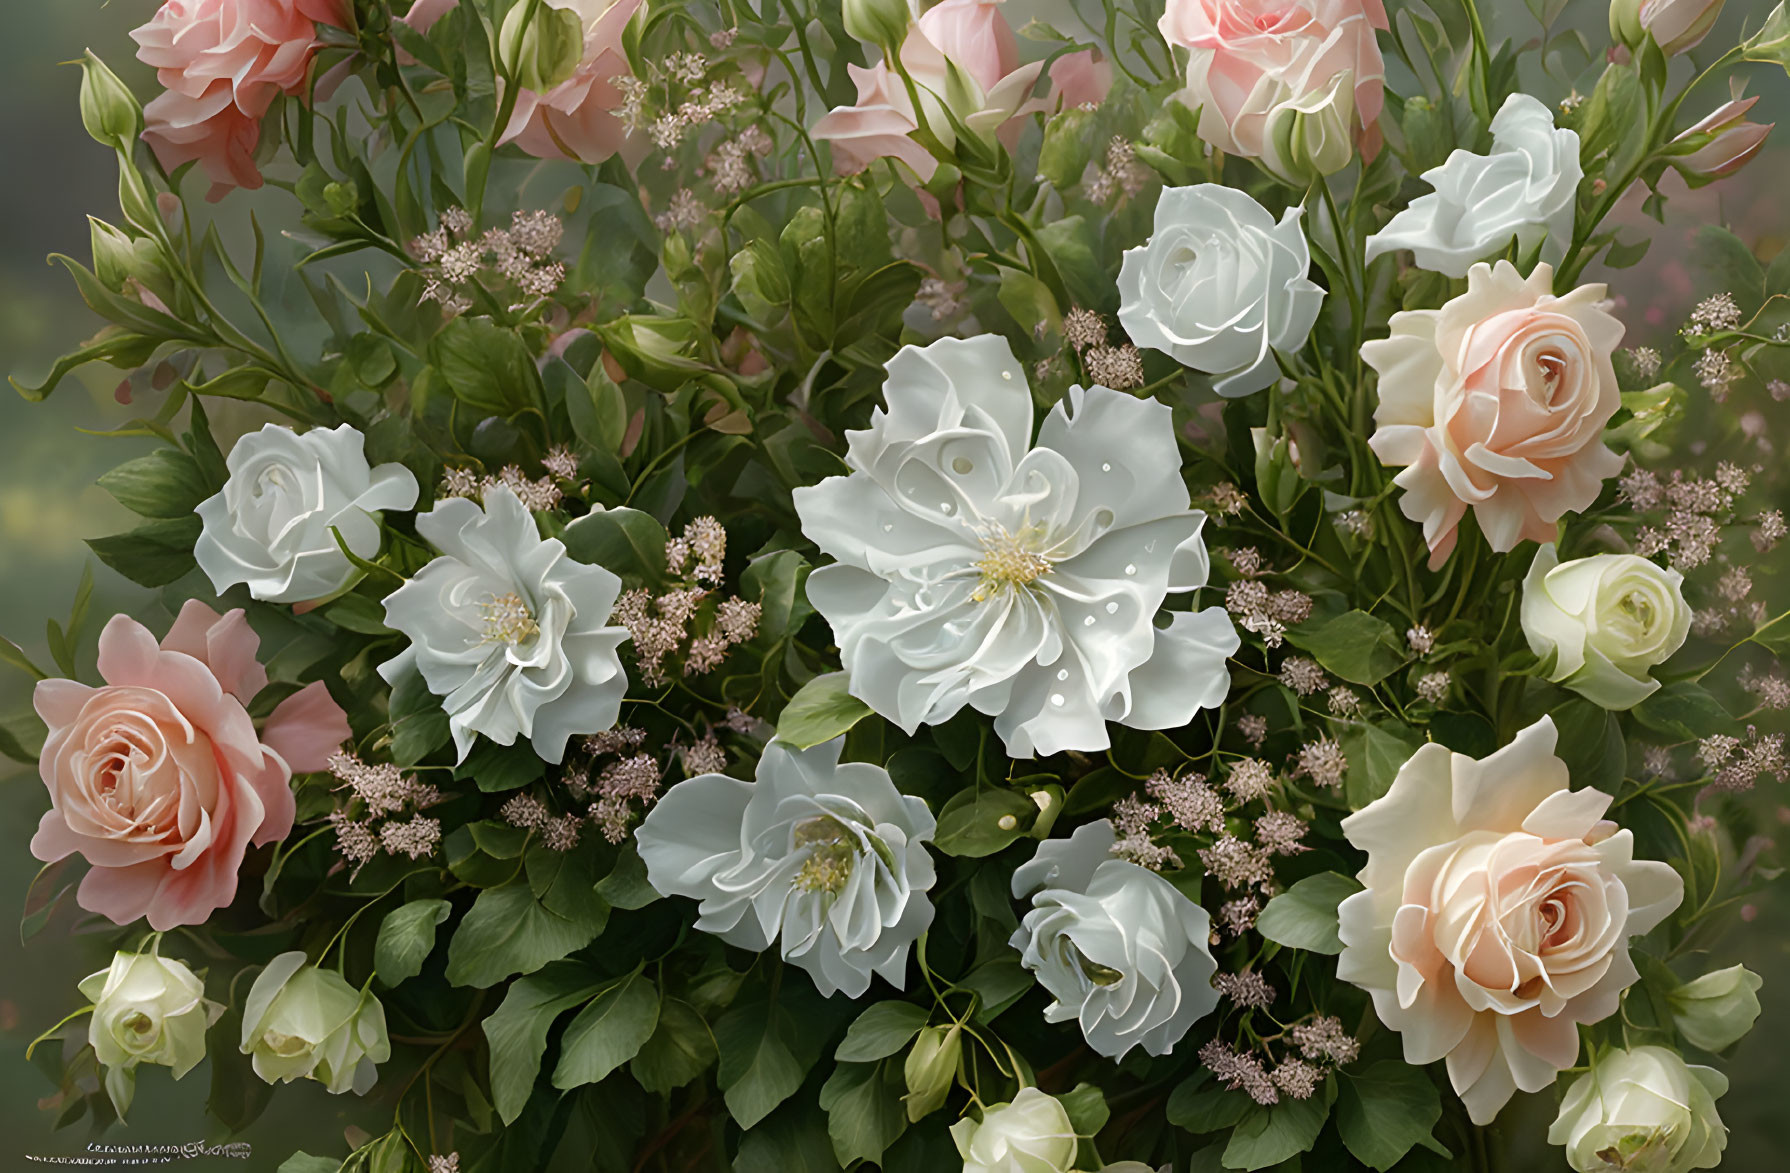 Soft Pink and White Roses with Green Foliage and Pink Blossoms on Hazy Background